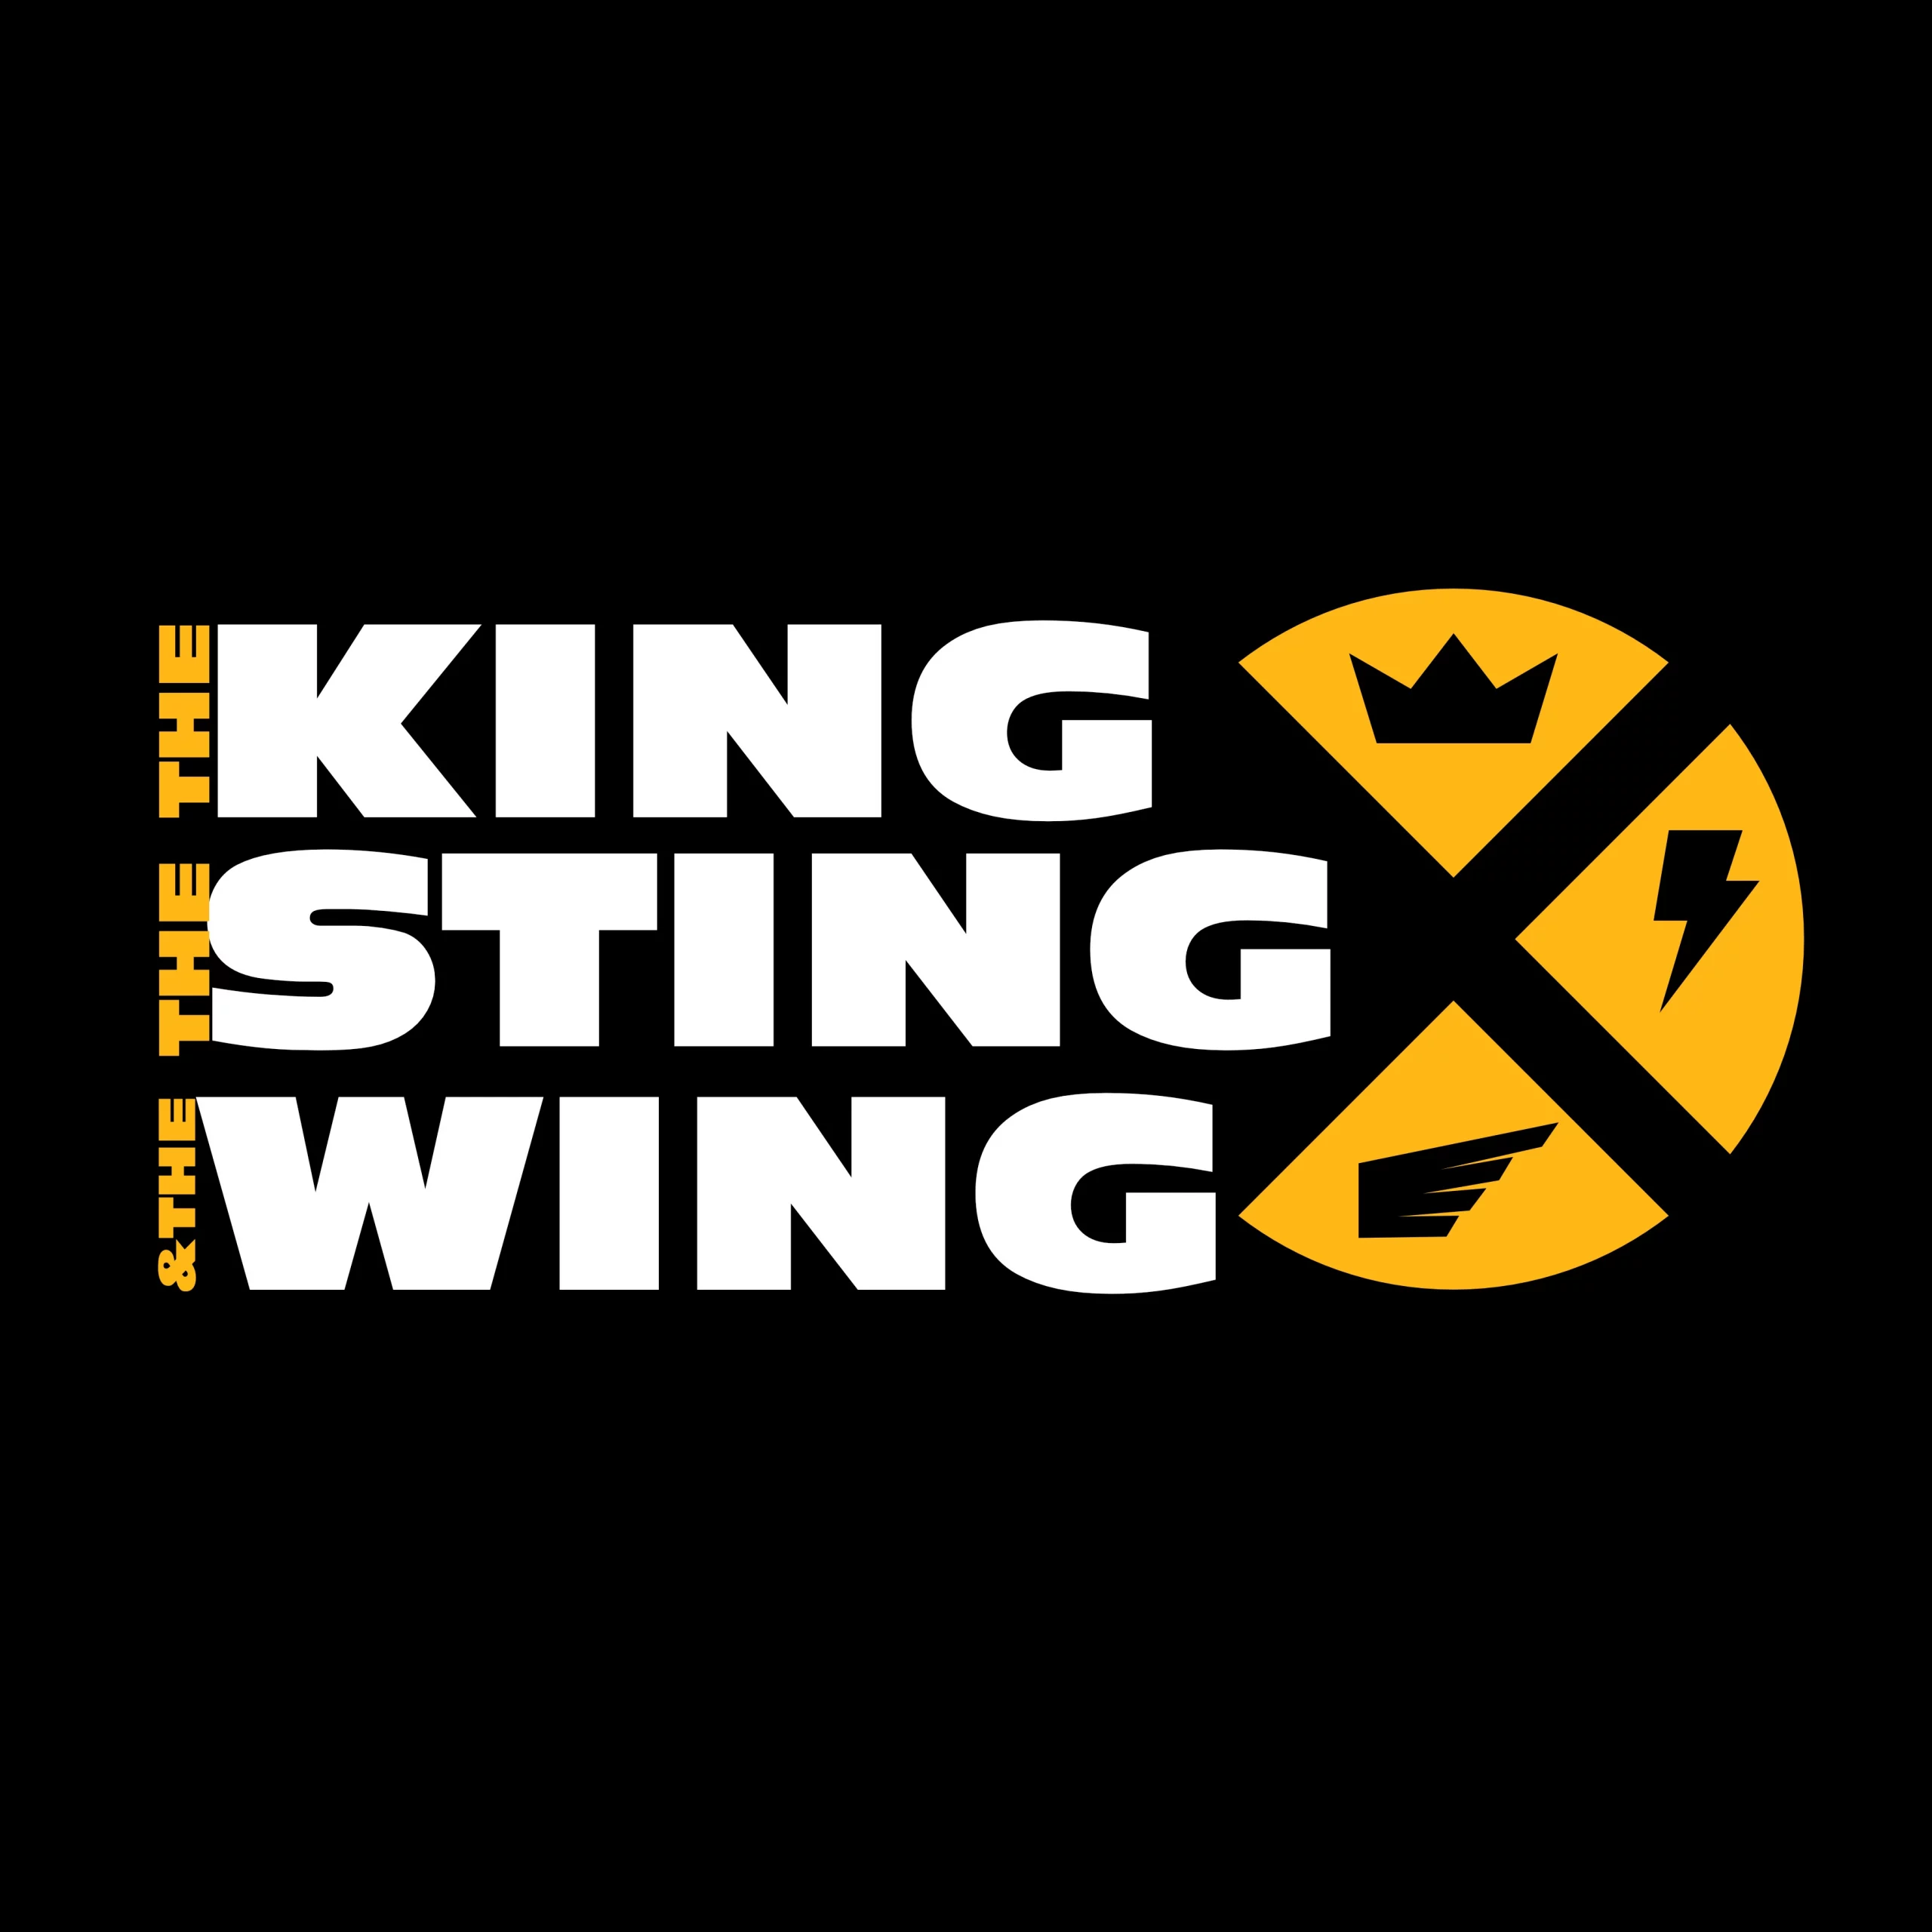 THE KING THE STING AND THE WING